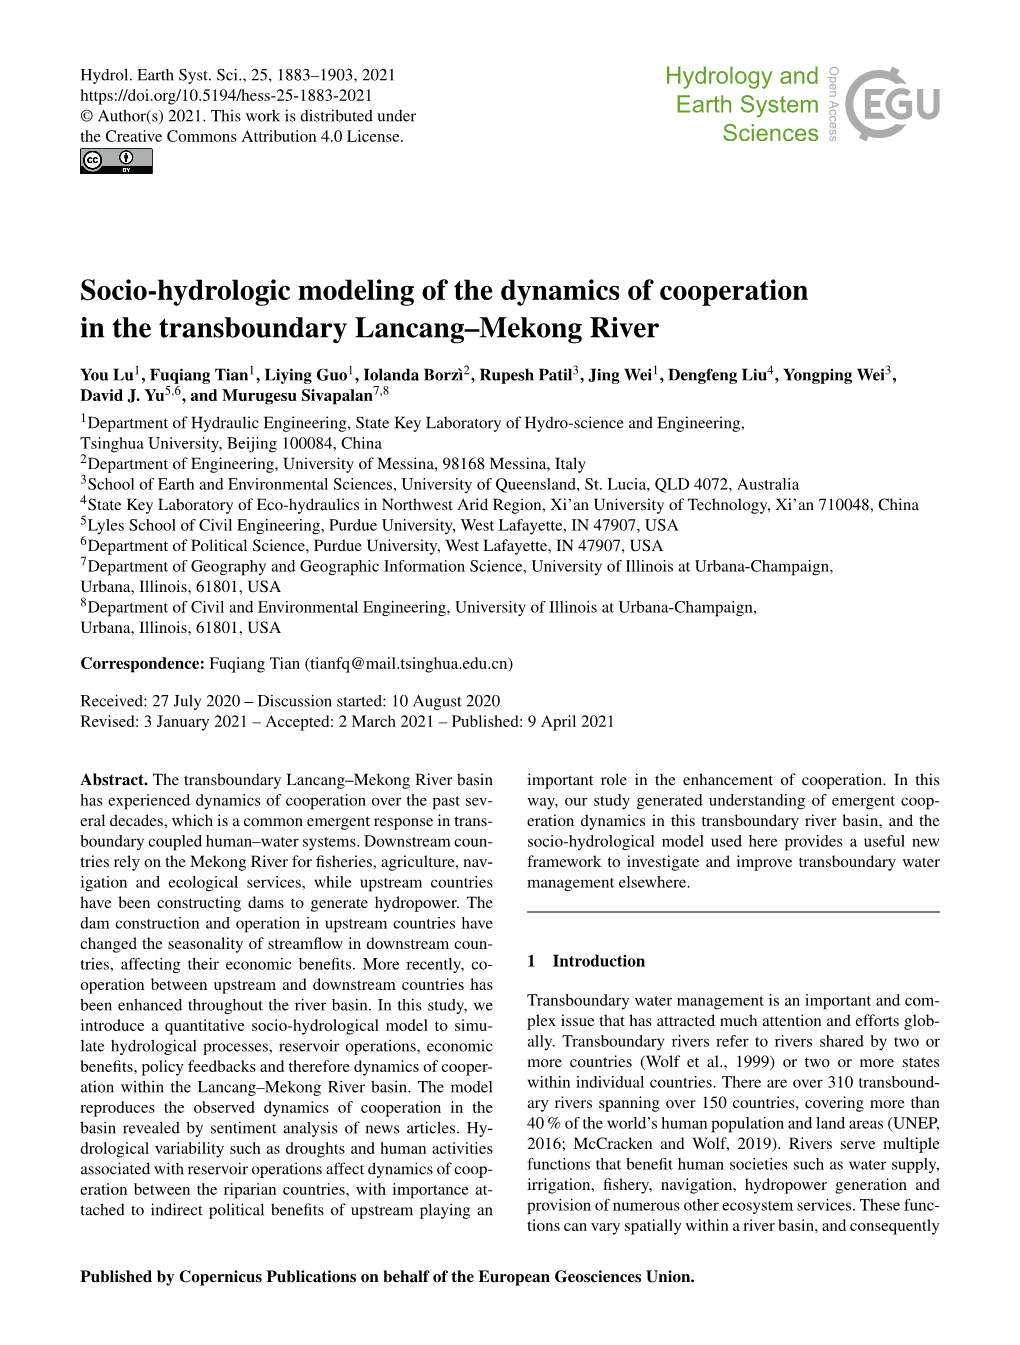 Socio-Hydrologic Modeling of the Dynamics of Cooperation in the Transboundary Lancang–Mekong River